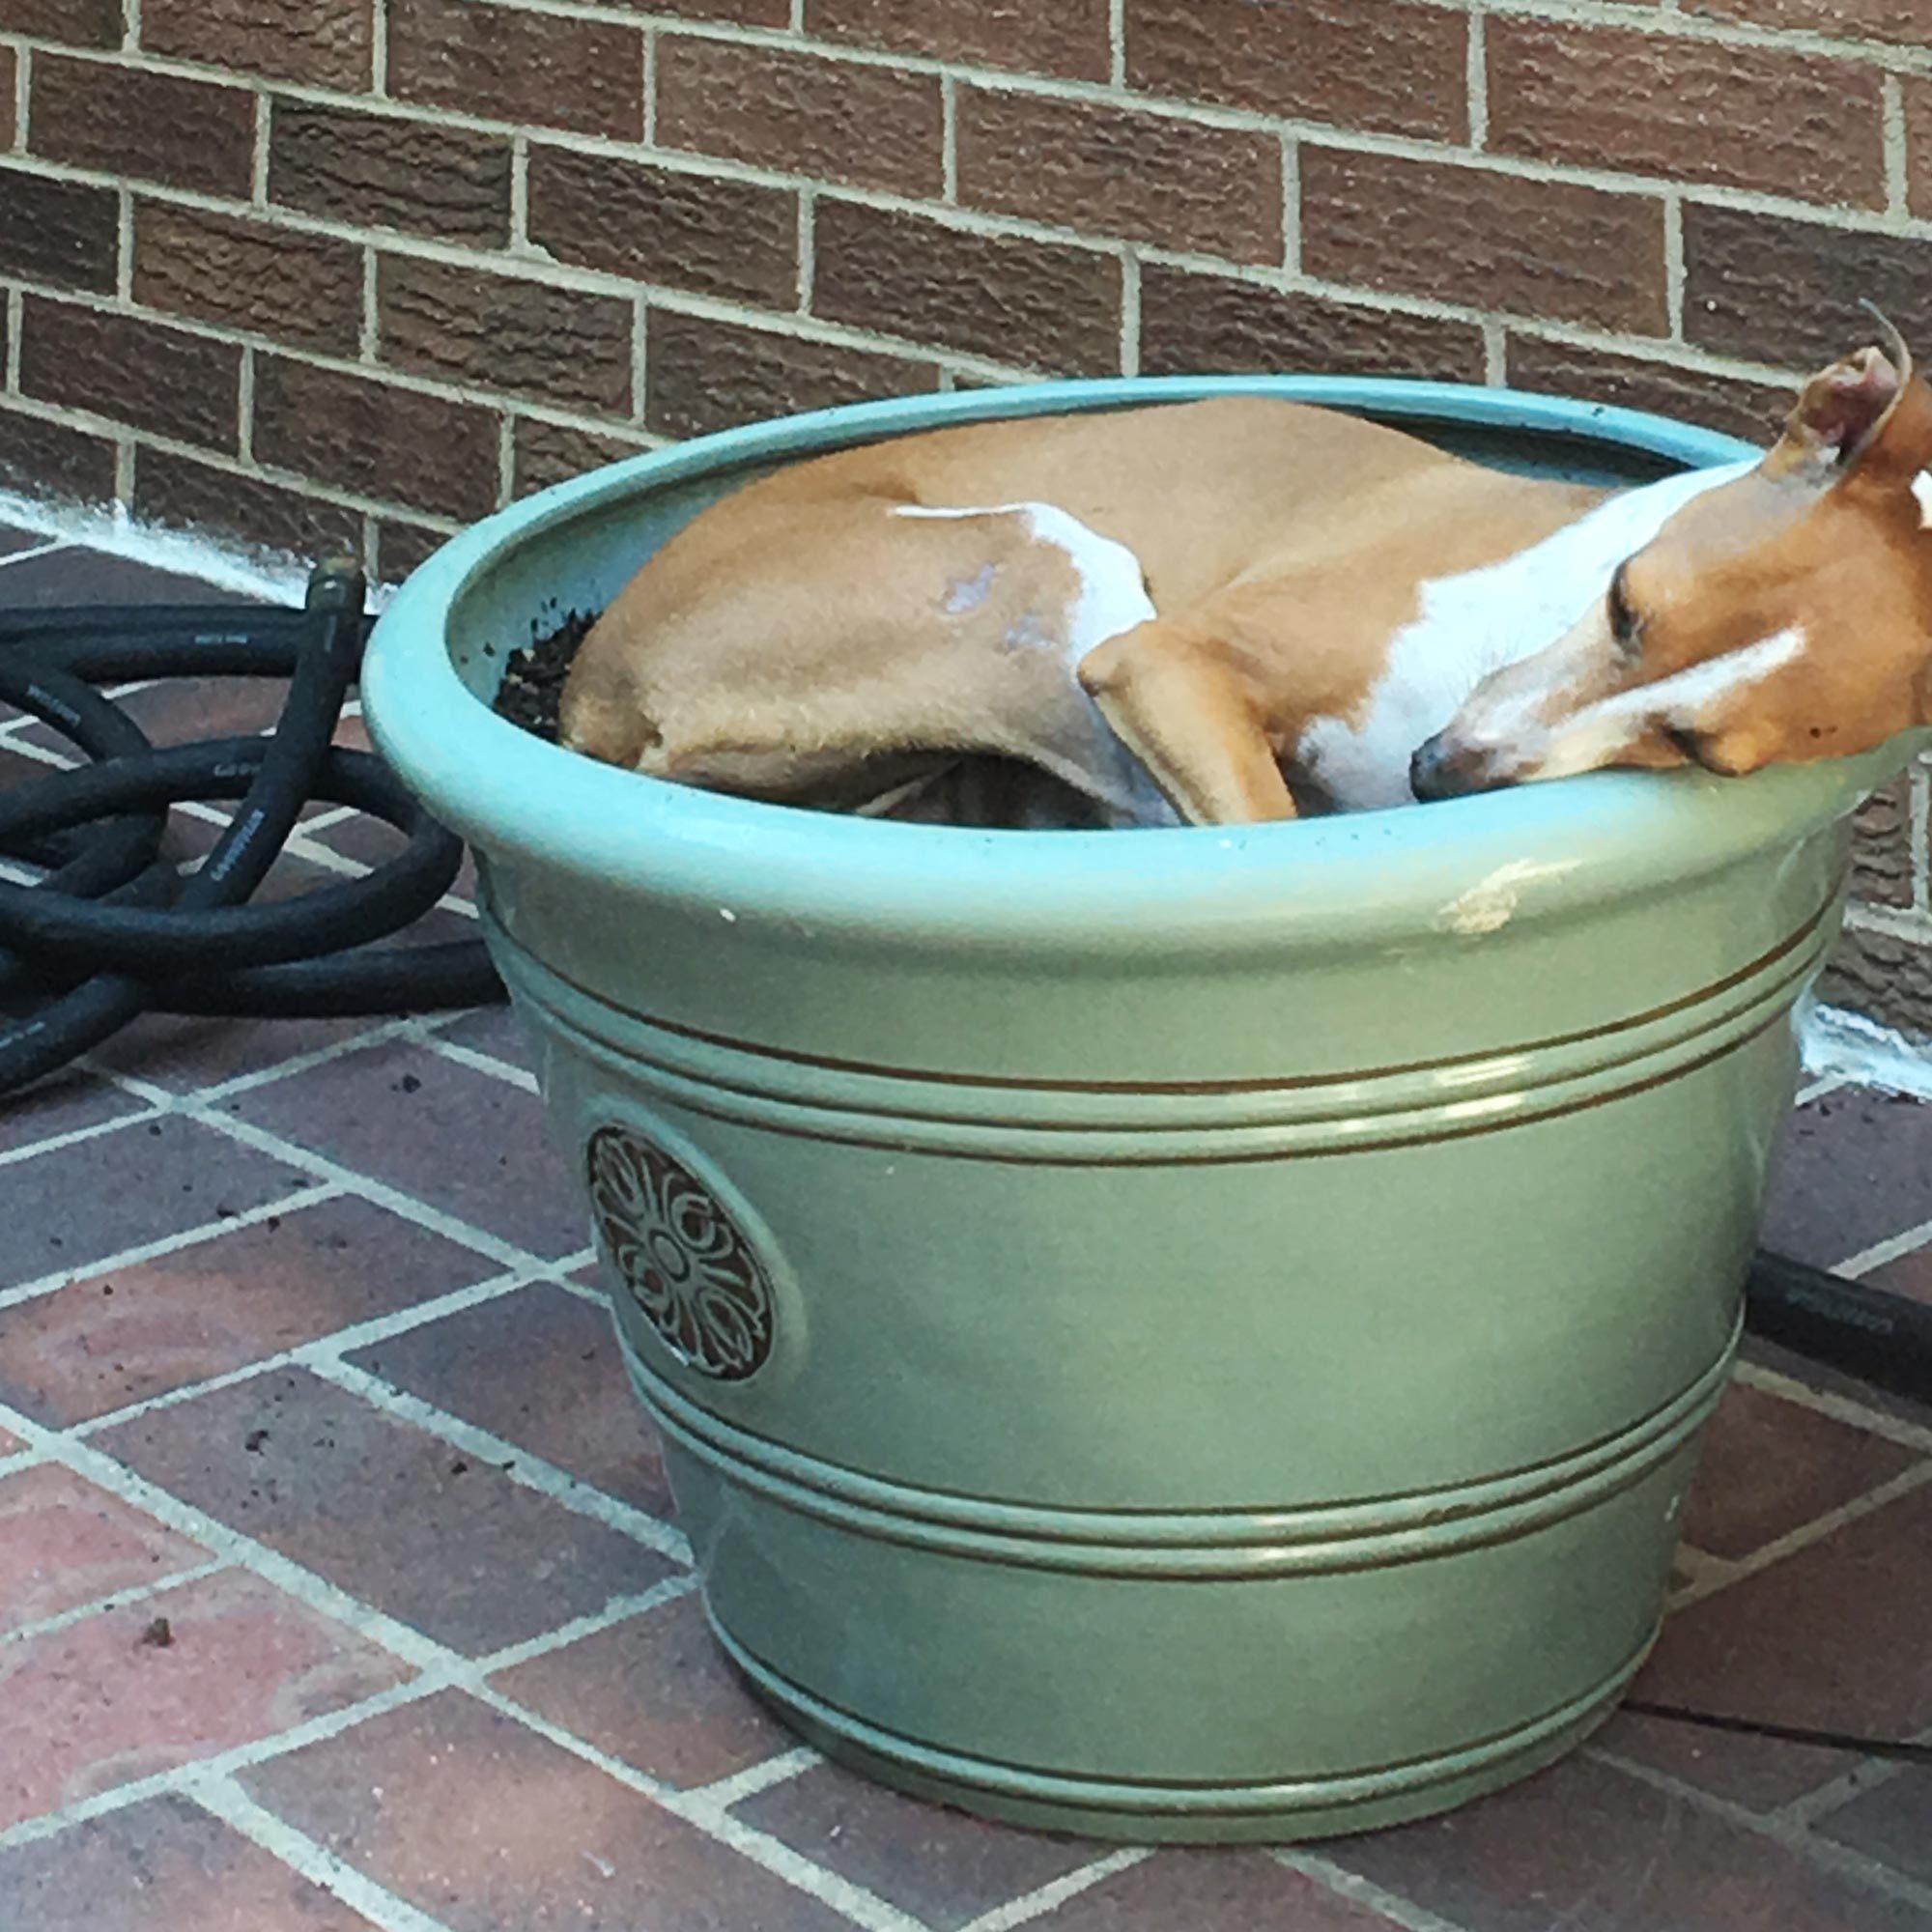 a medium sized dog sleeping in a large planter outside on a brick patio